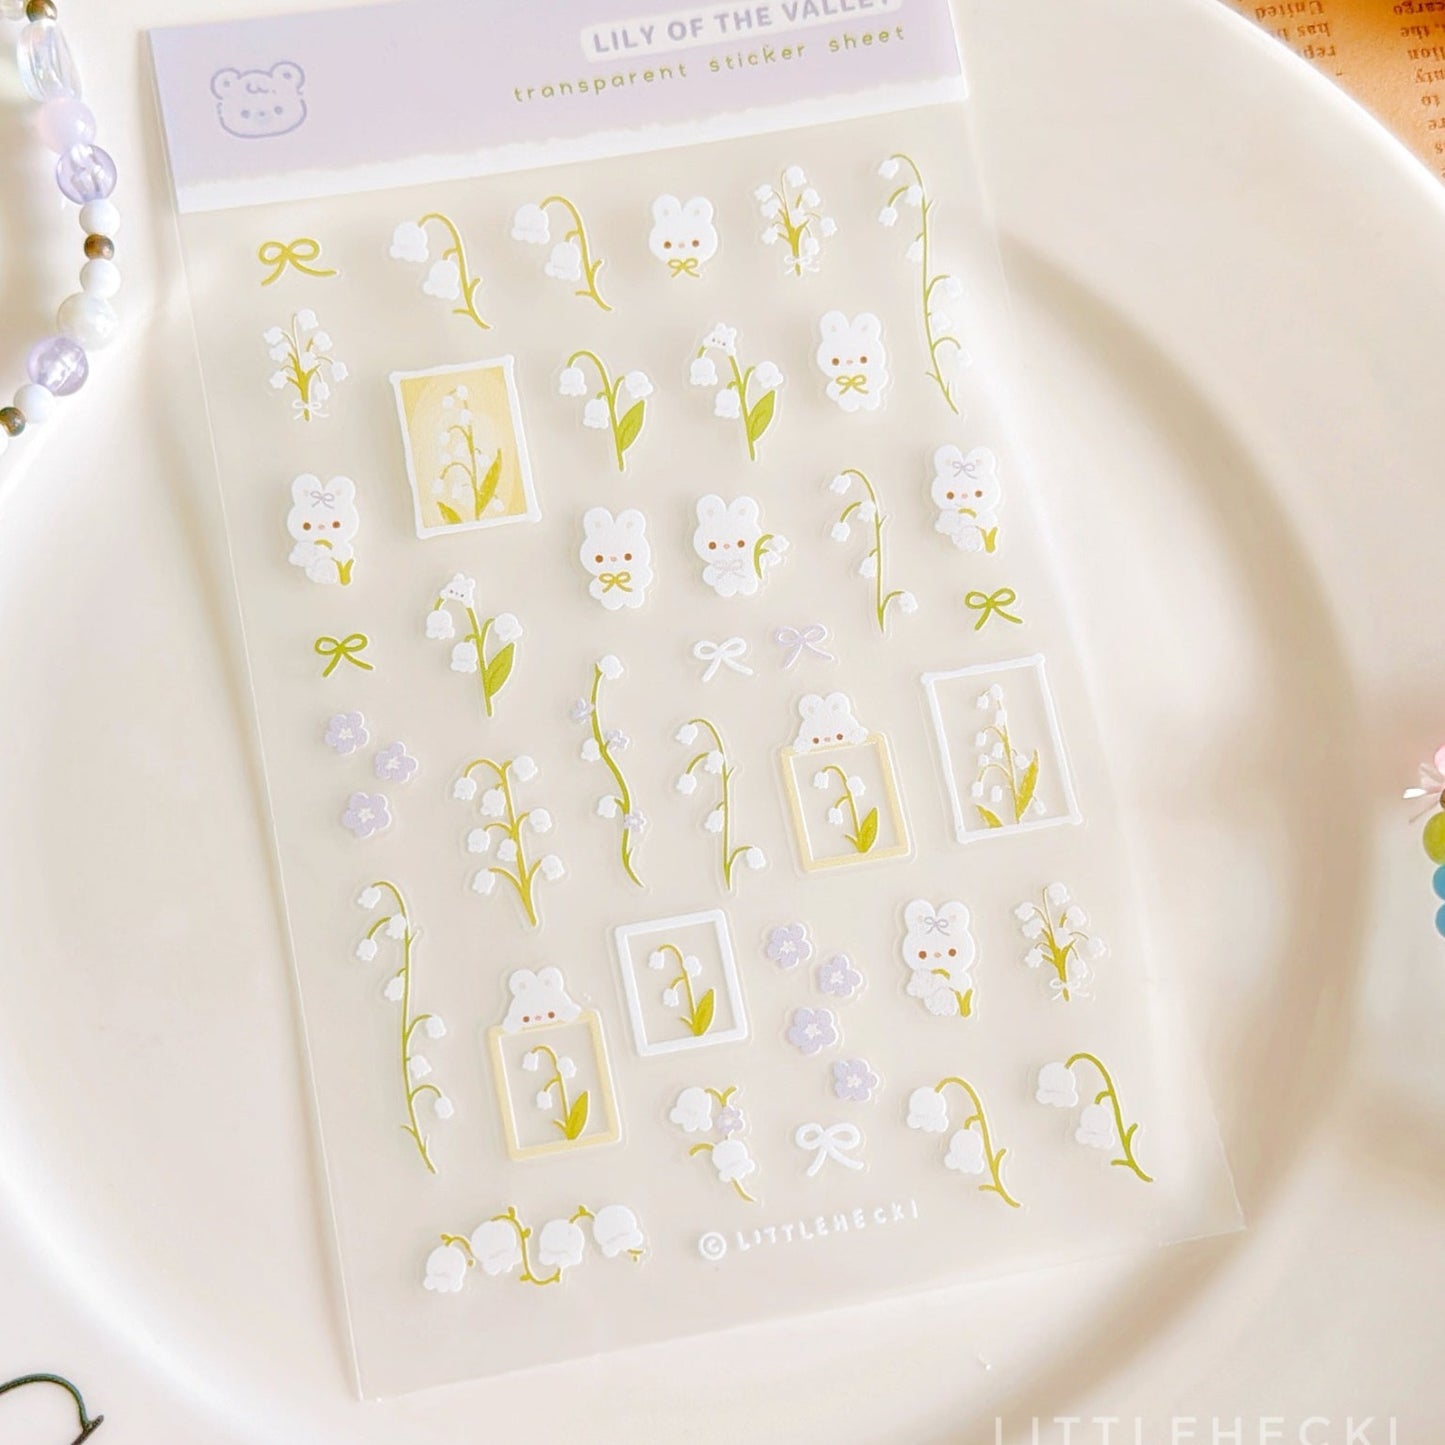 Lily of the Valley Transparent Sticker Sheet